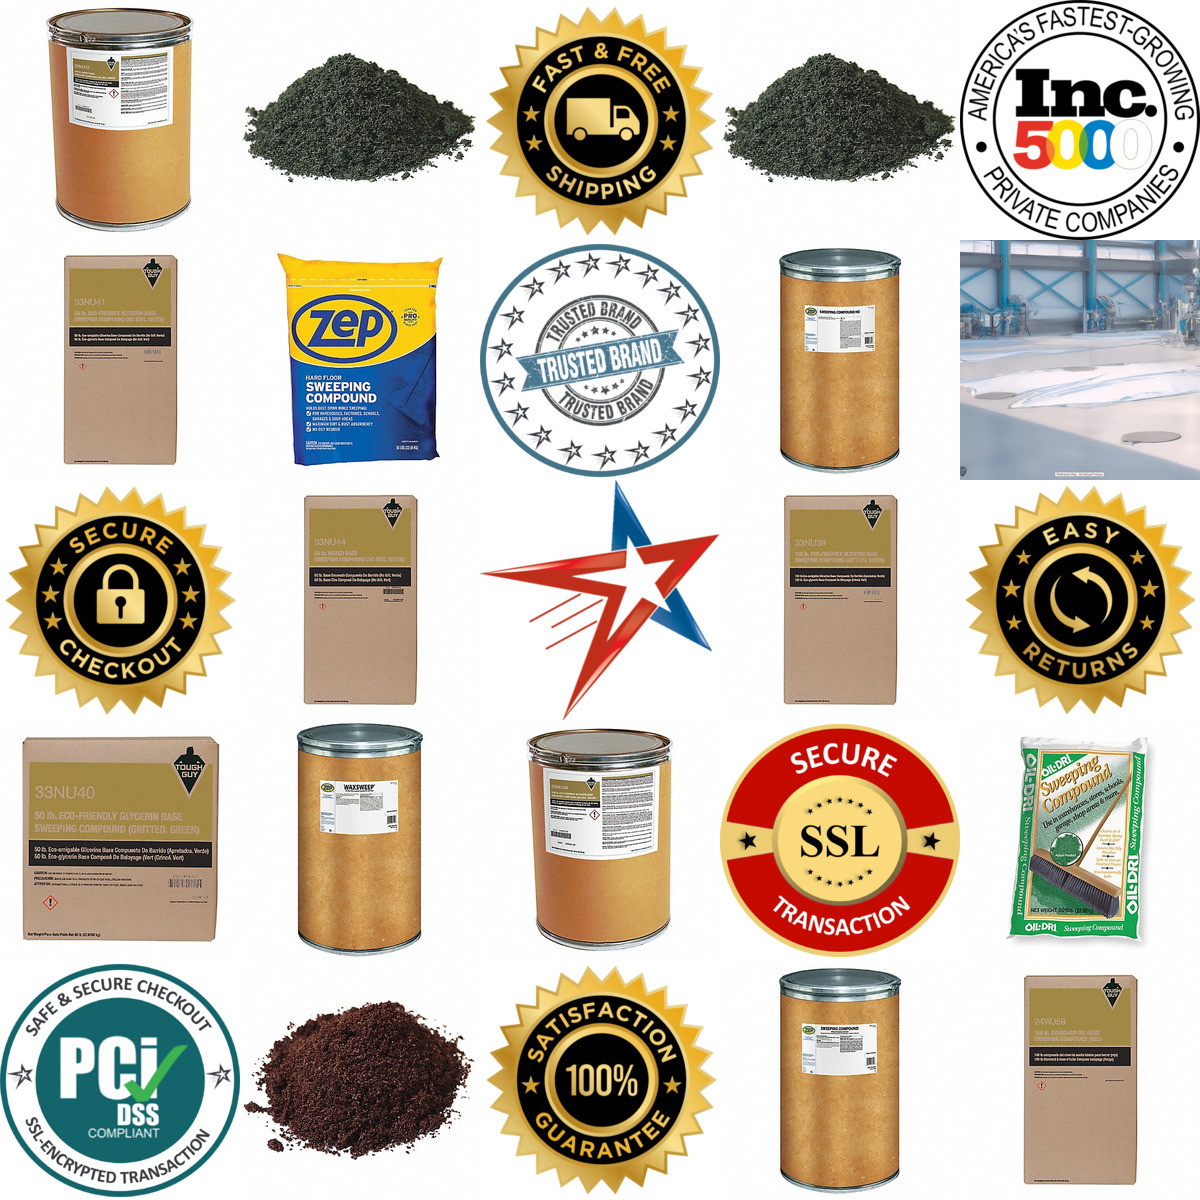 A selection of Floor Sweeping Compounds products on GoVets